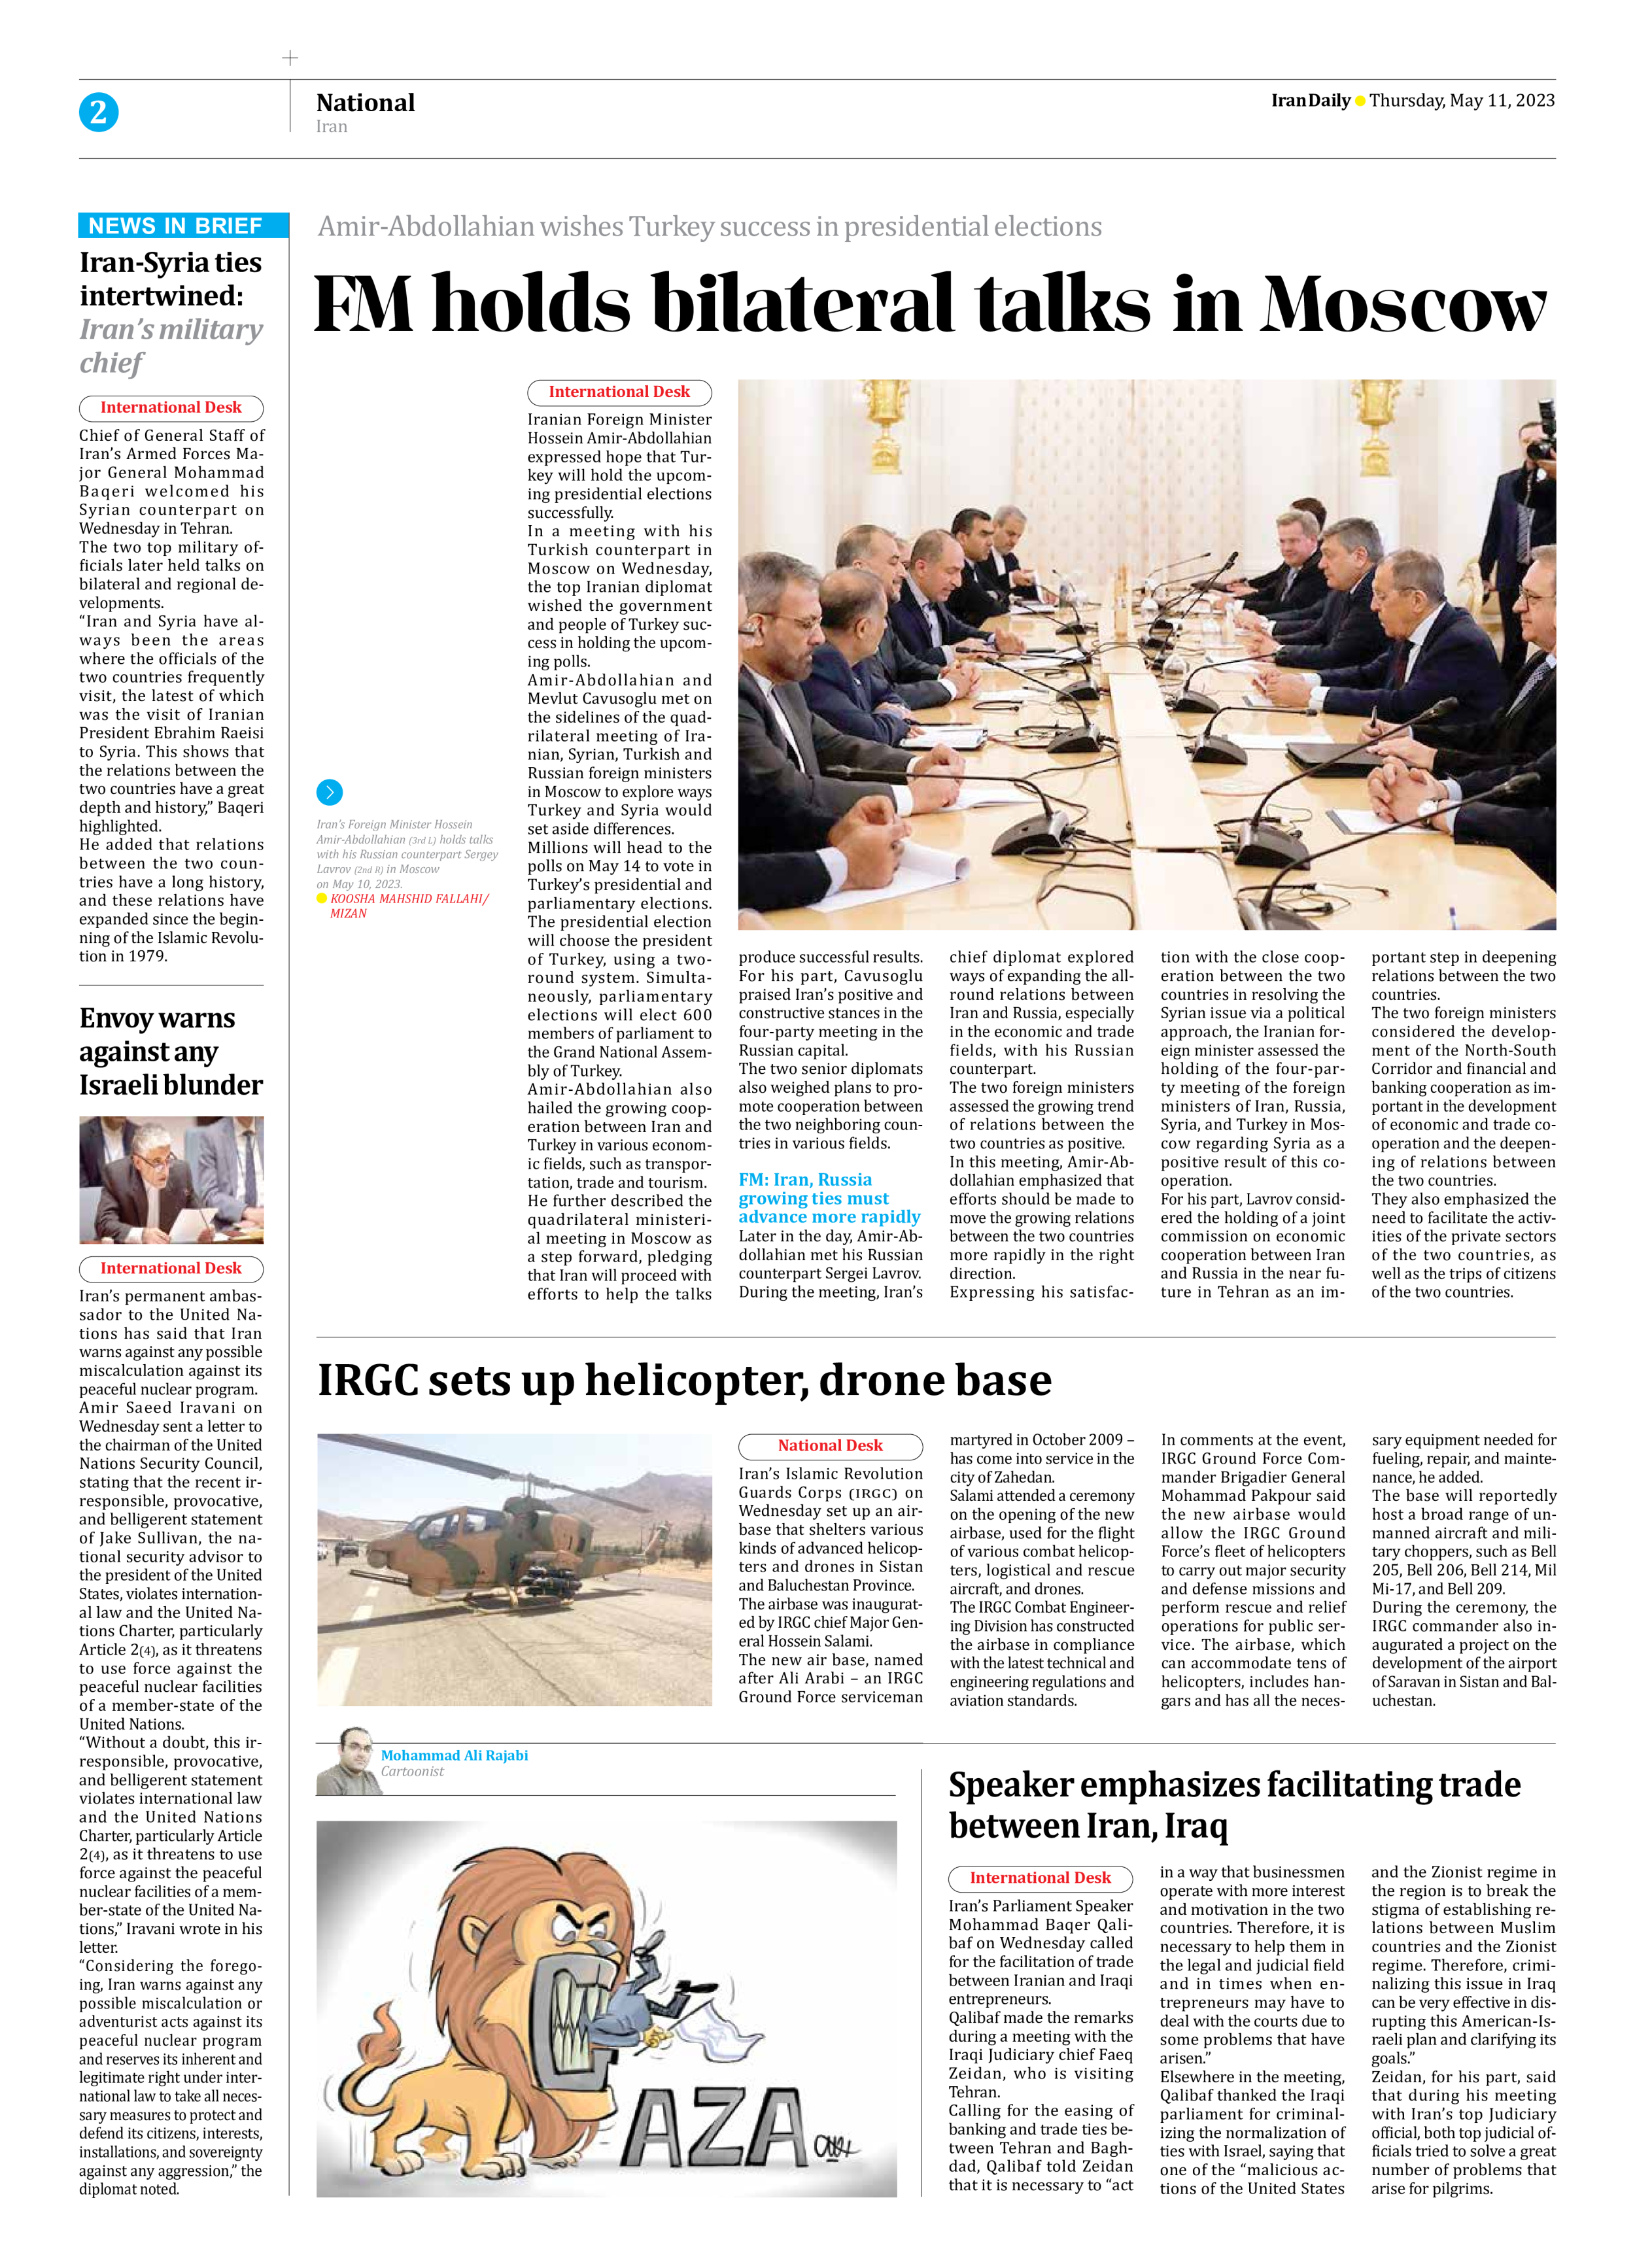 Iran Daily - Number Seven Thousand Two Hundred and Eighty Nine - 11 May 2023 - Page 2